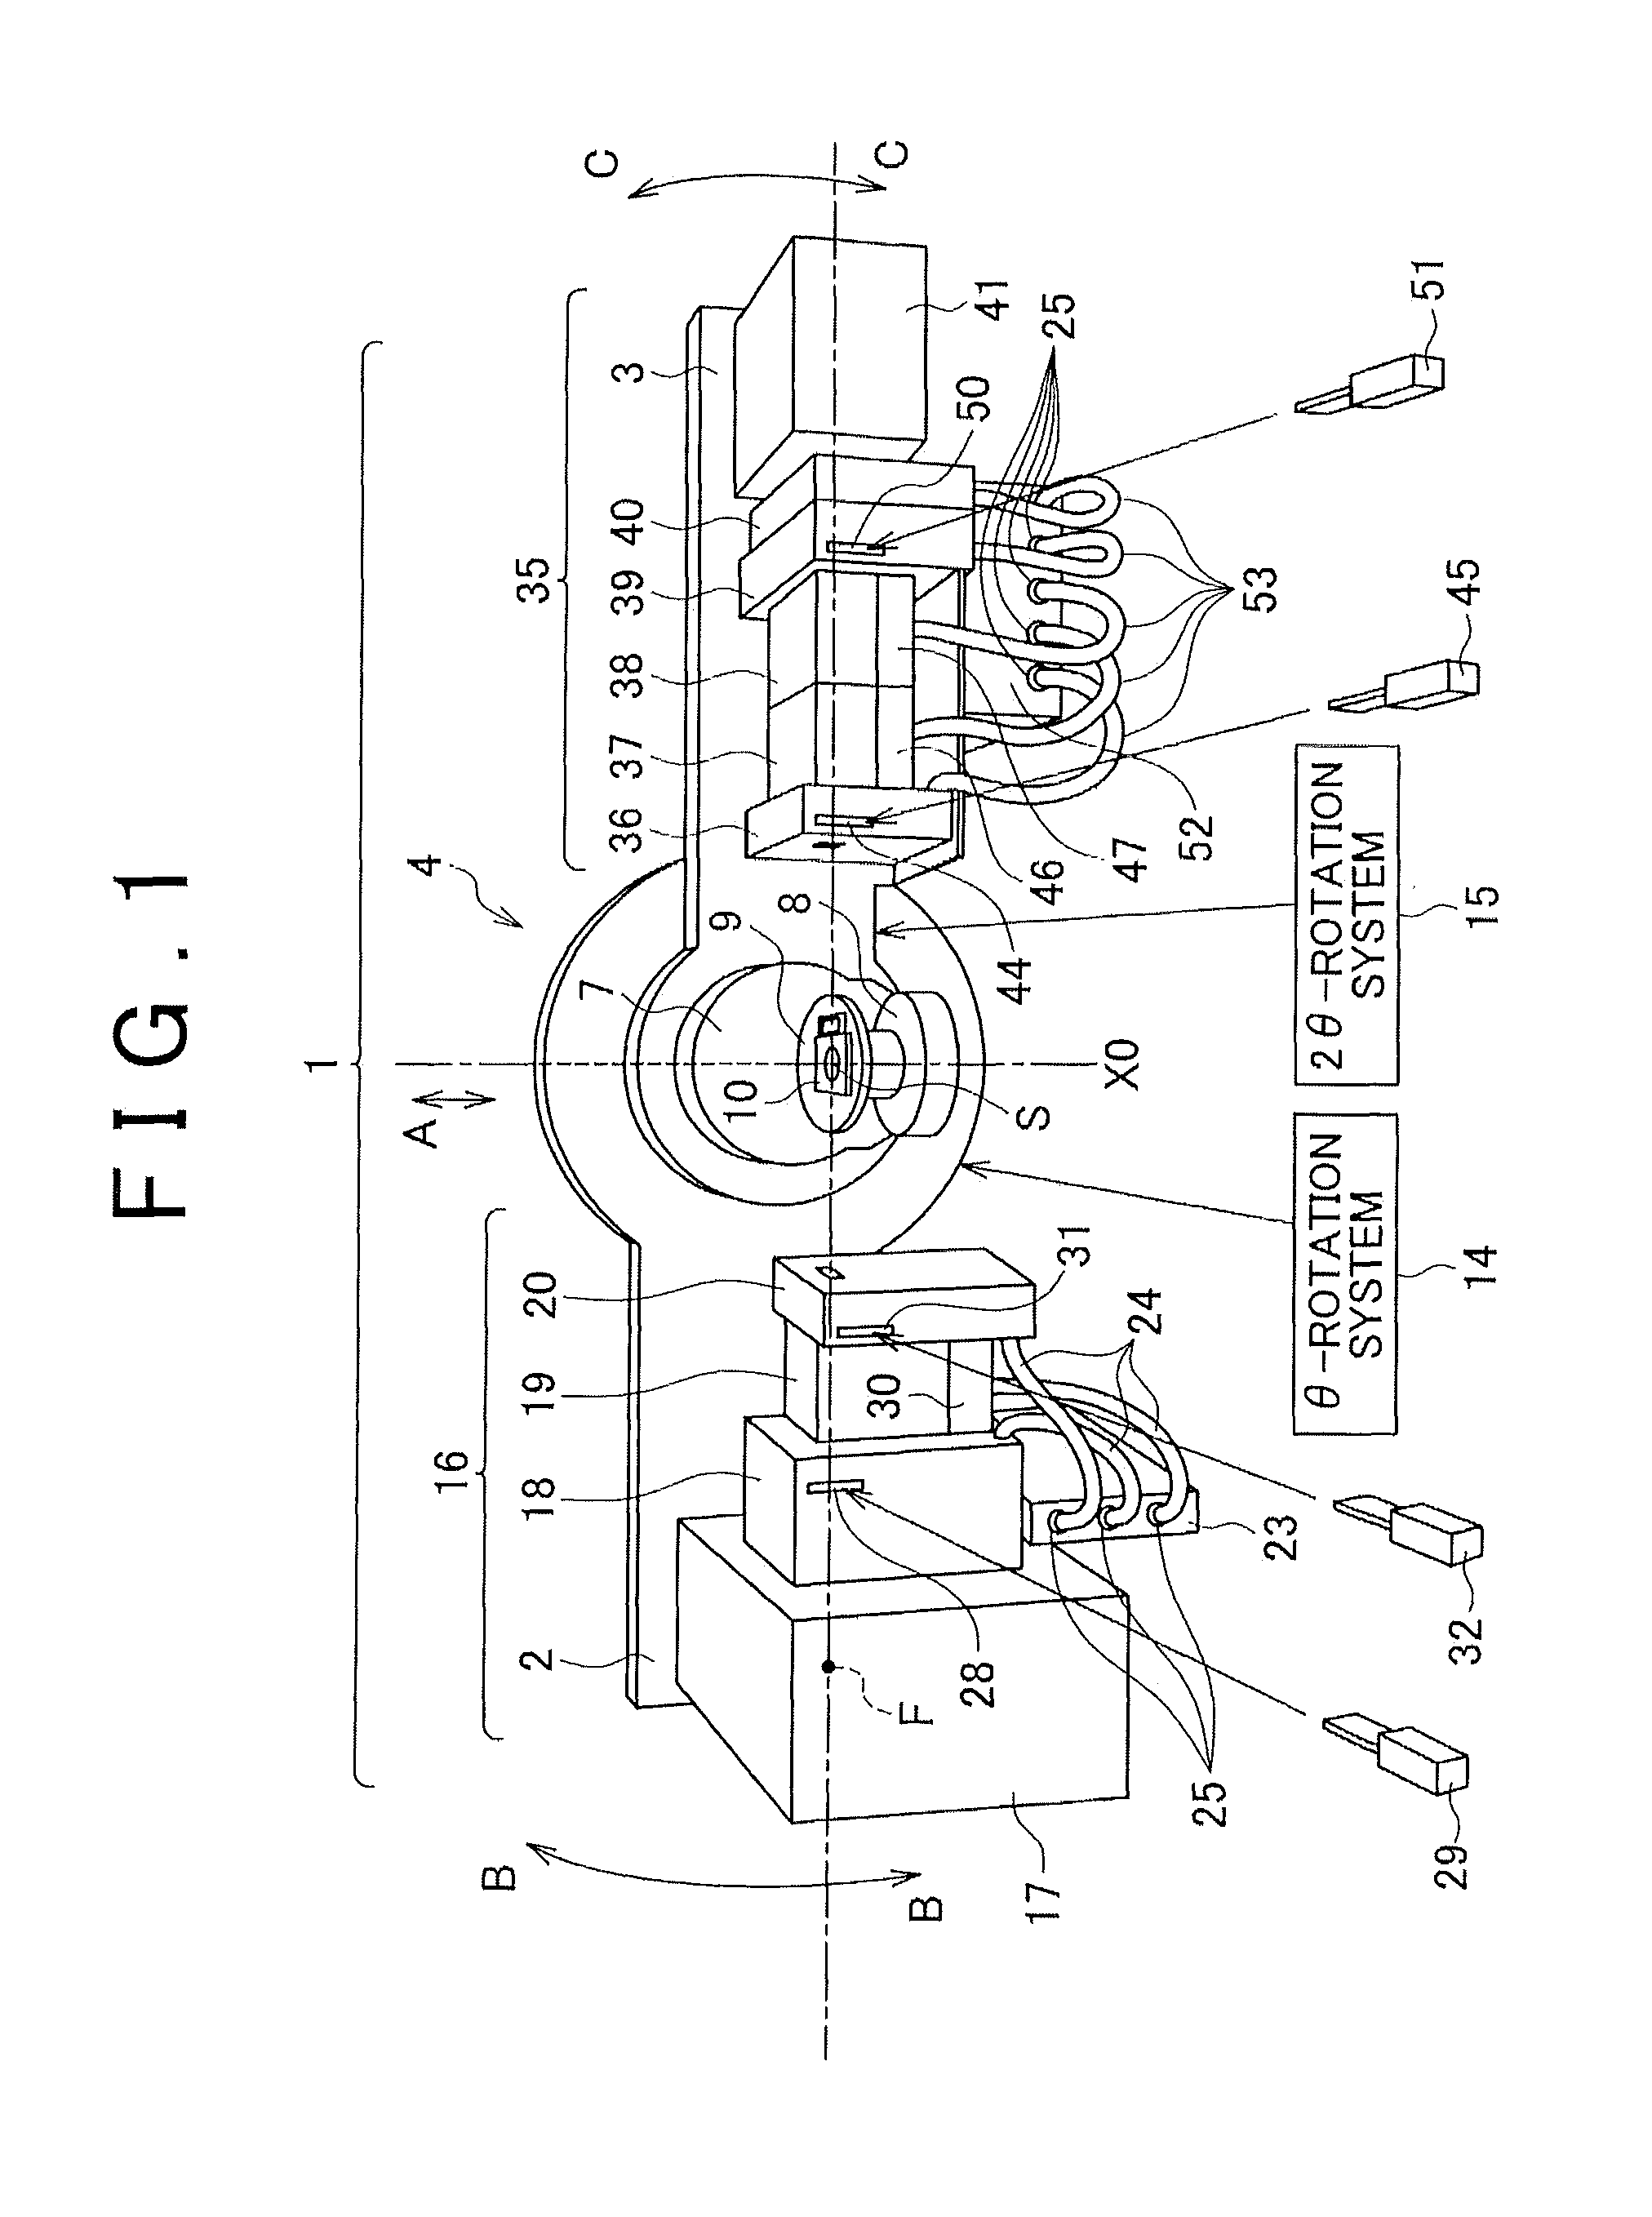 X-ray optical component device and X-ray analyzer